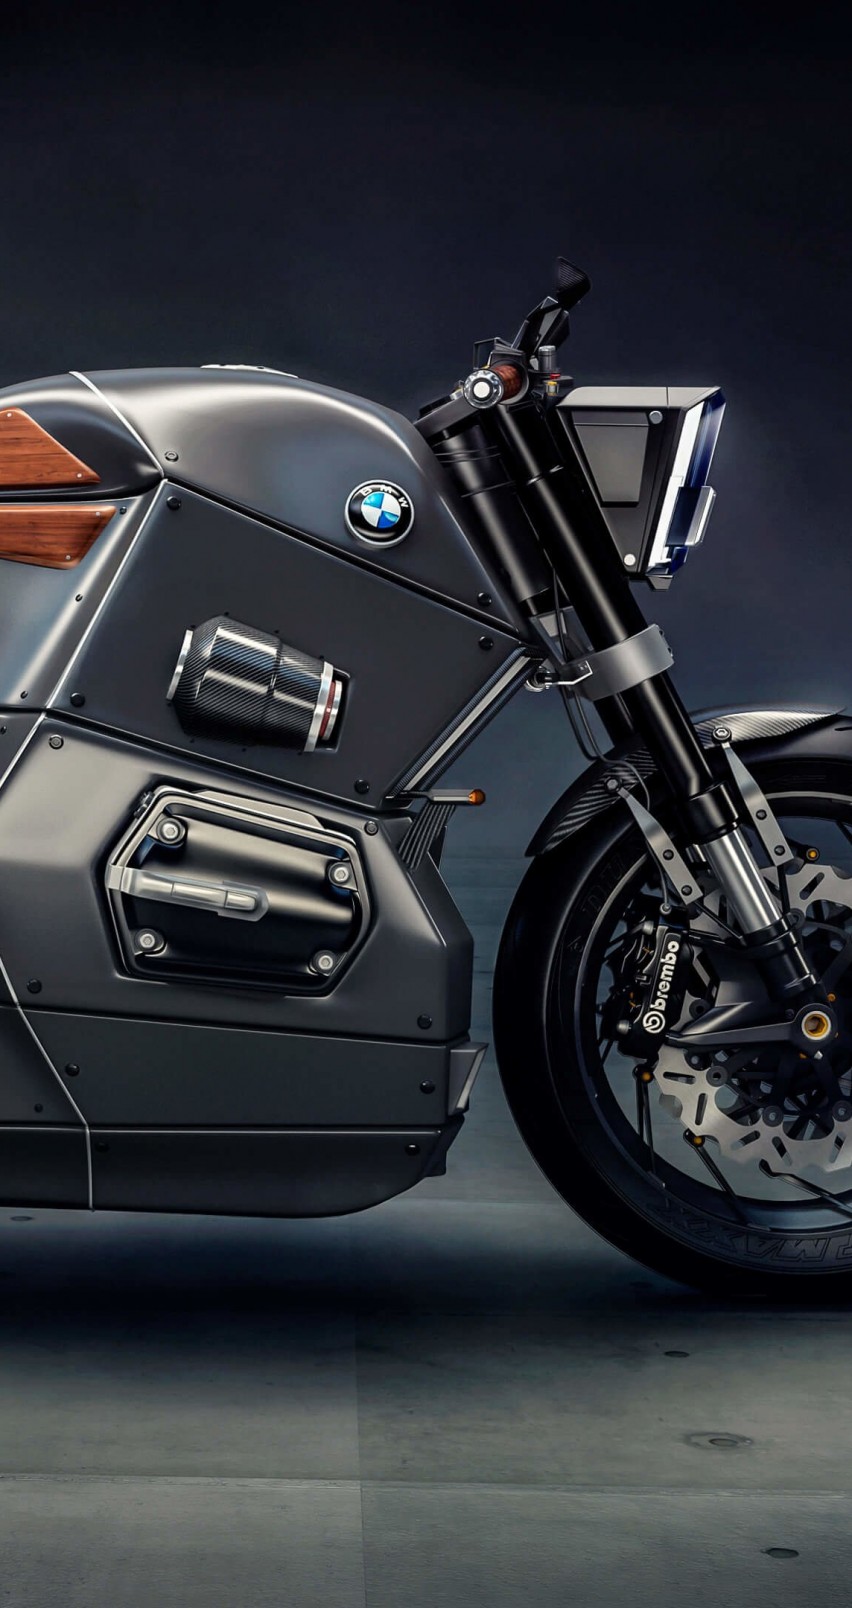 BMW M Bike Concept Wallpaper for Apple iPhone 6 / 6s